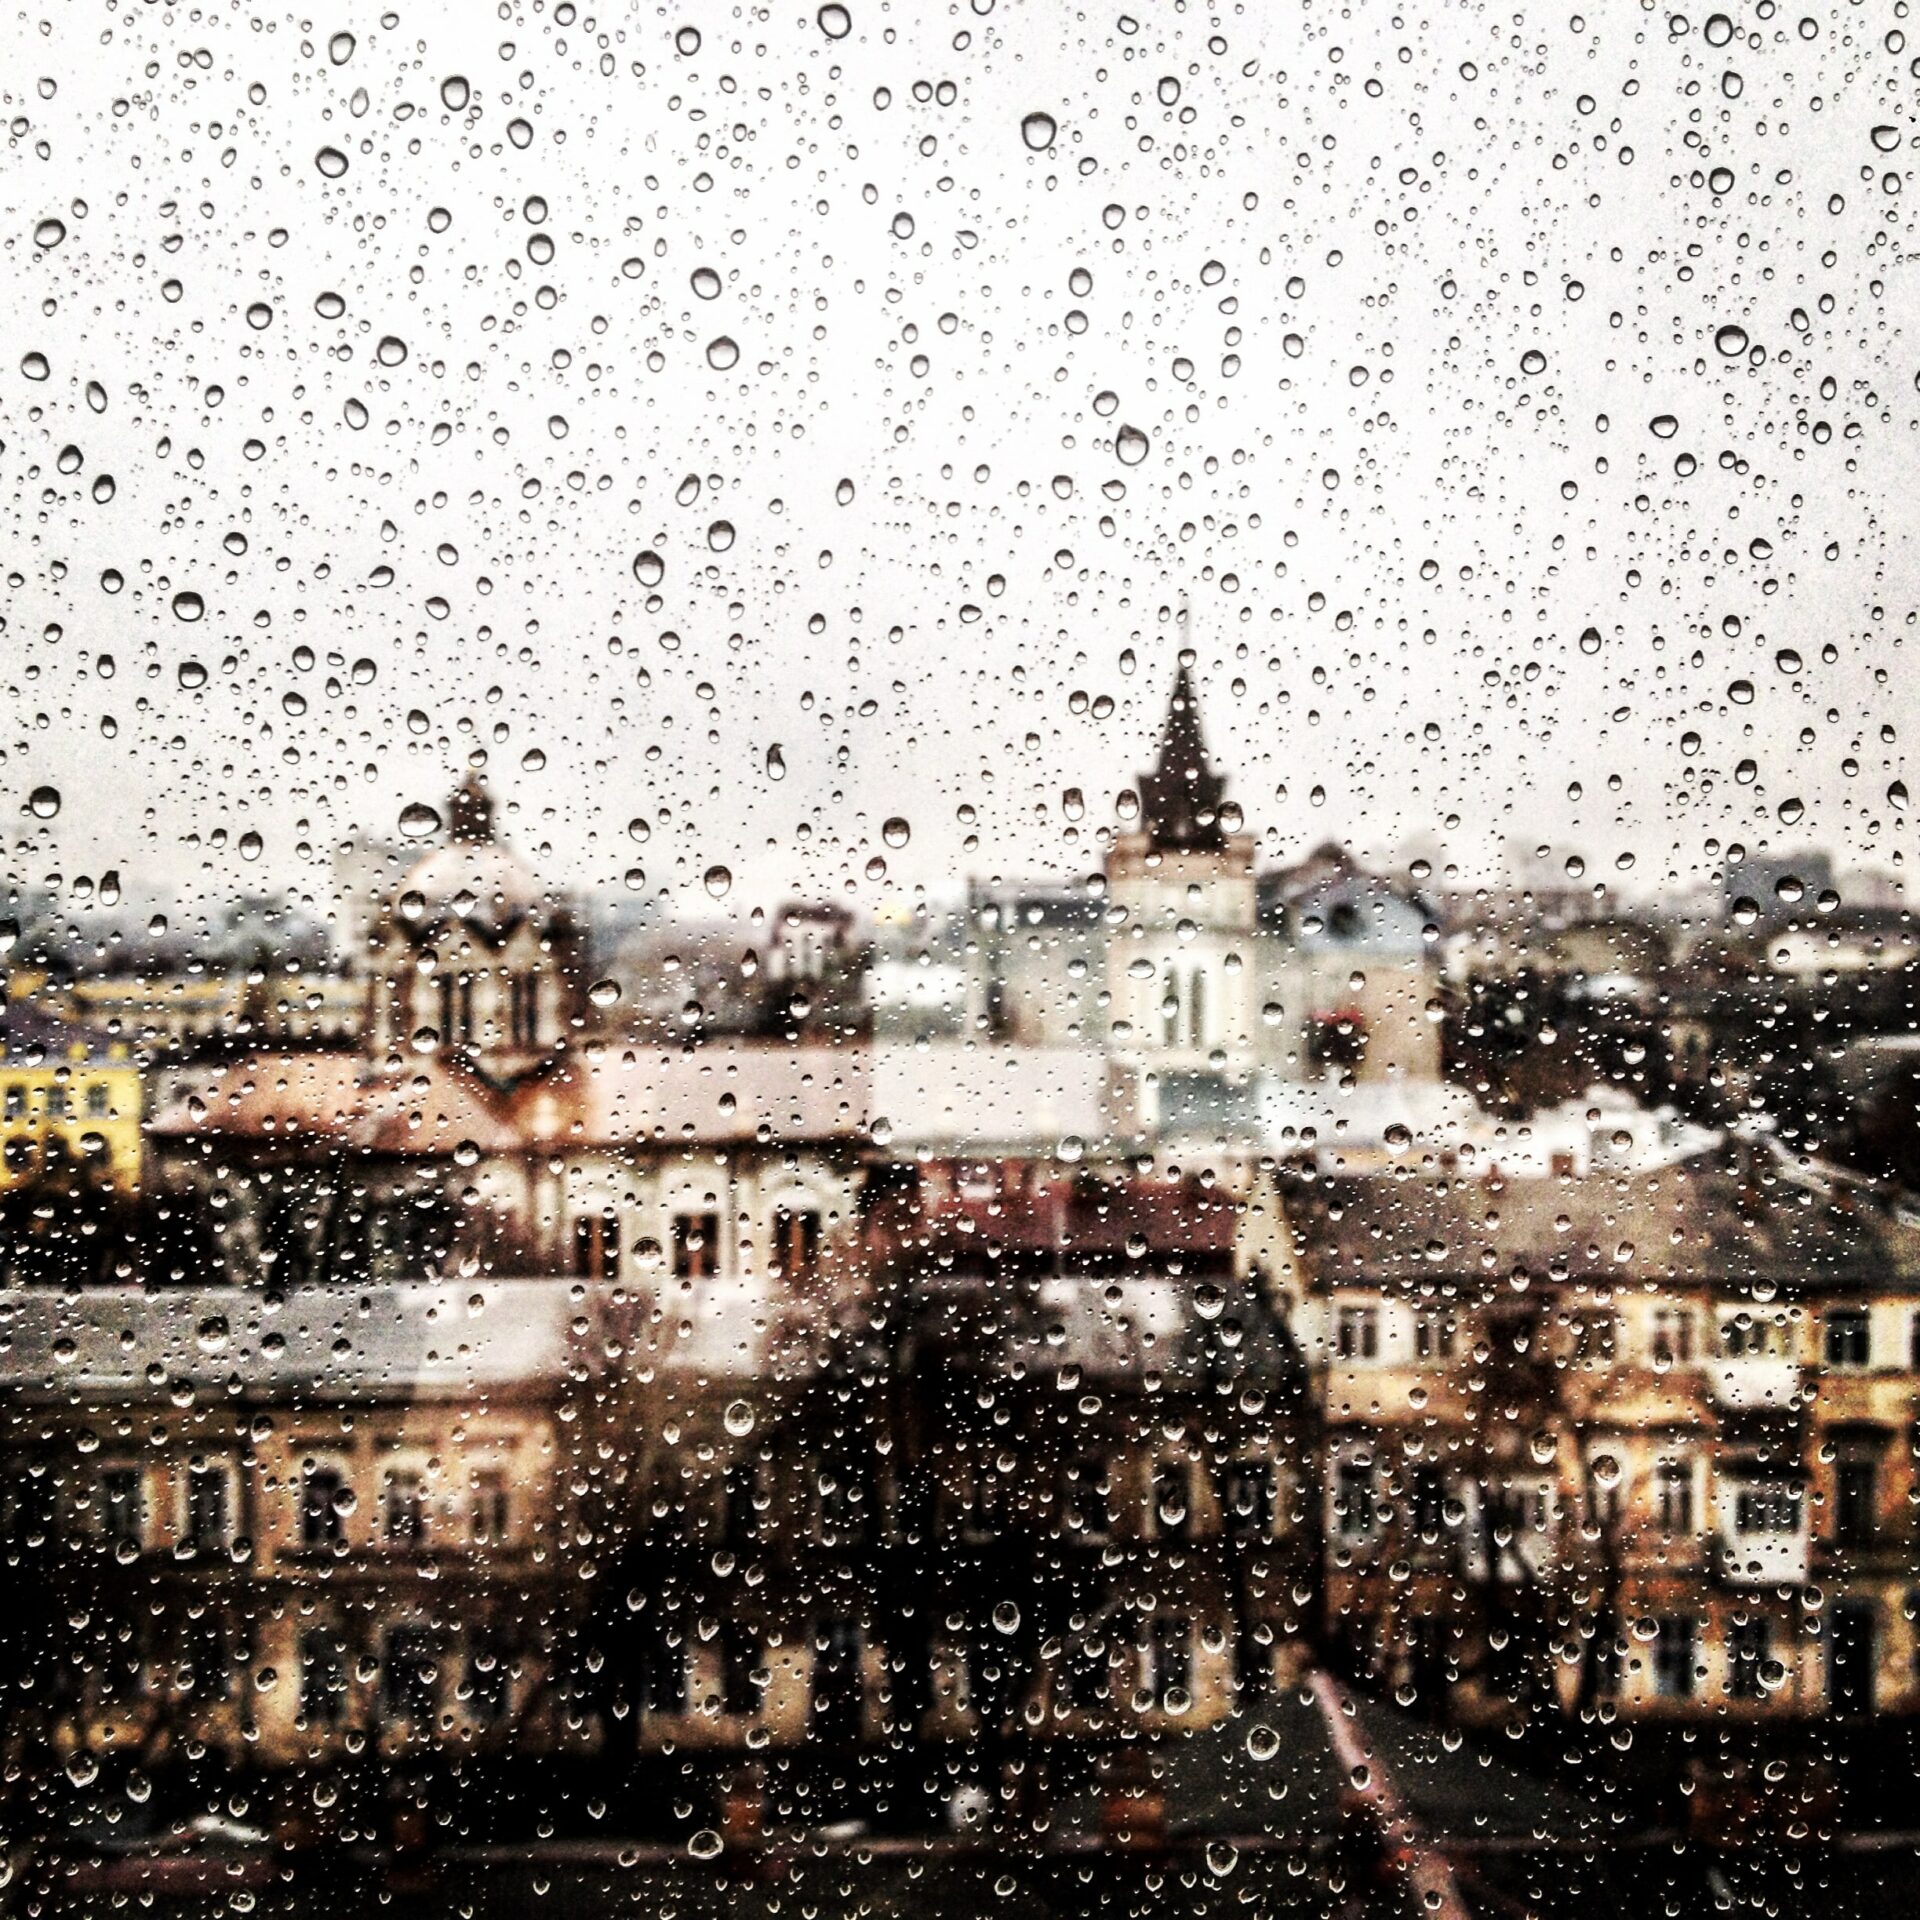 window view on the rainy day